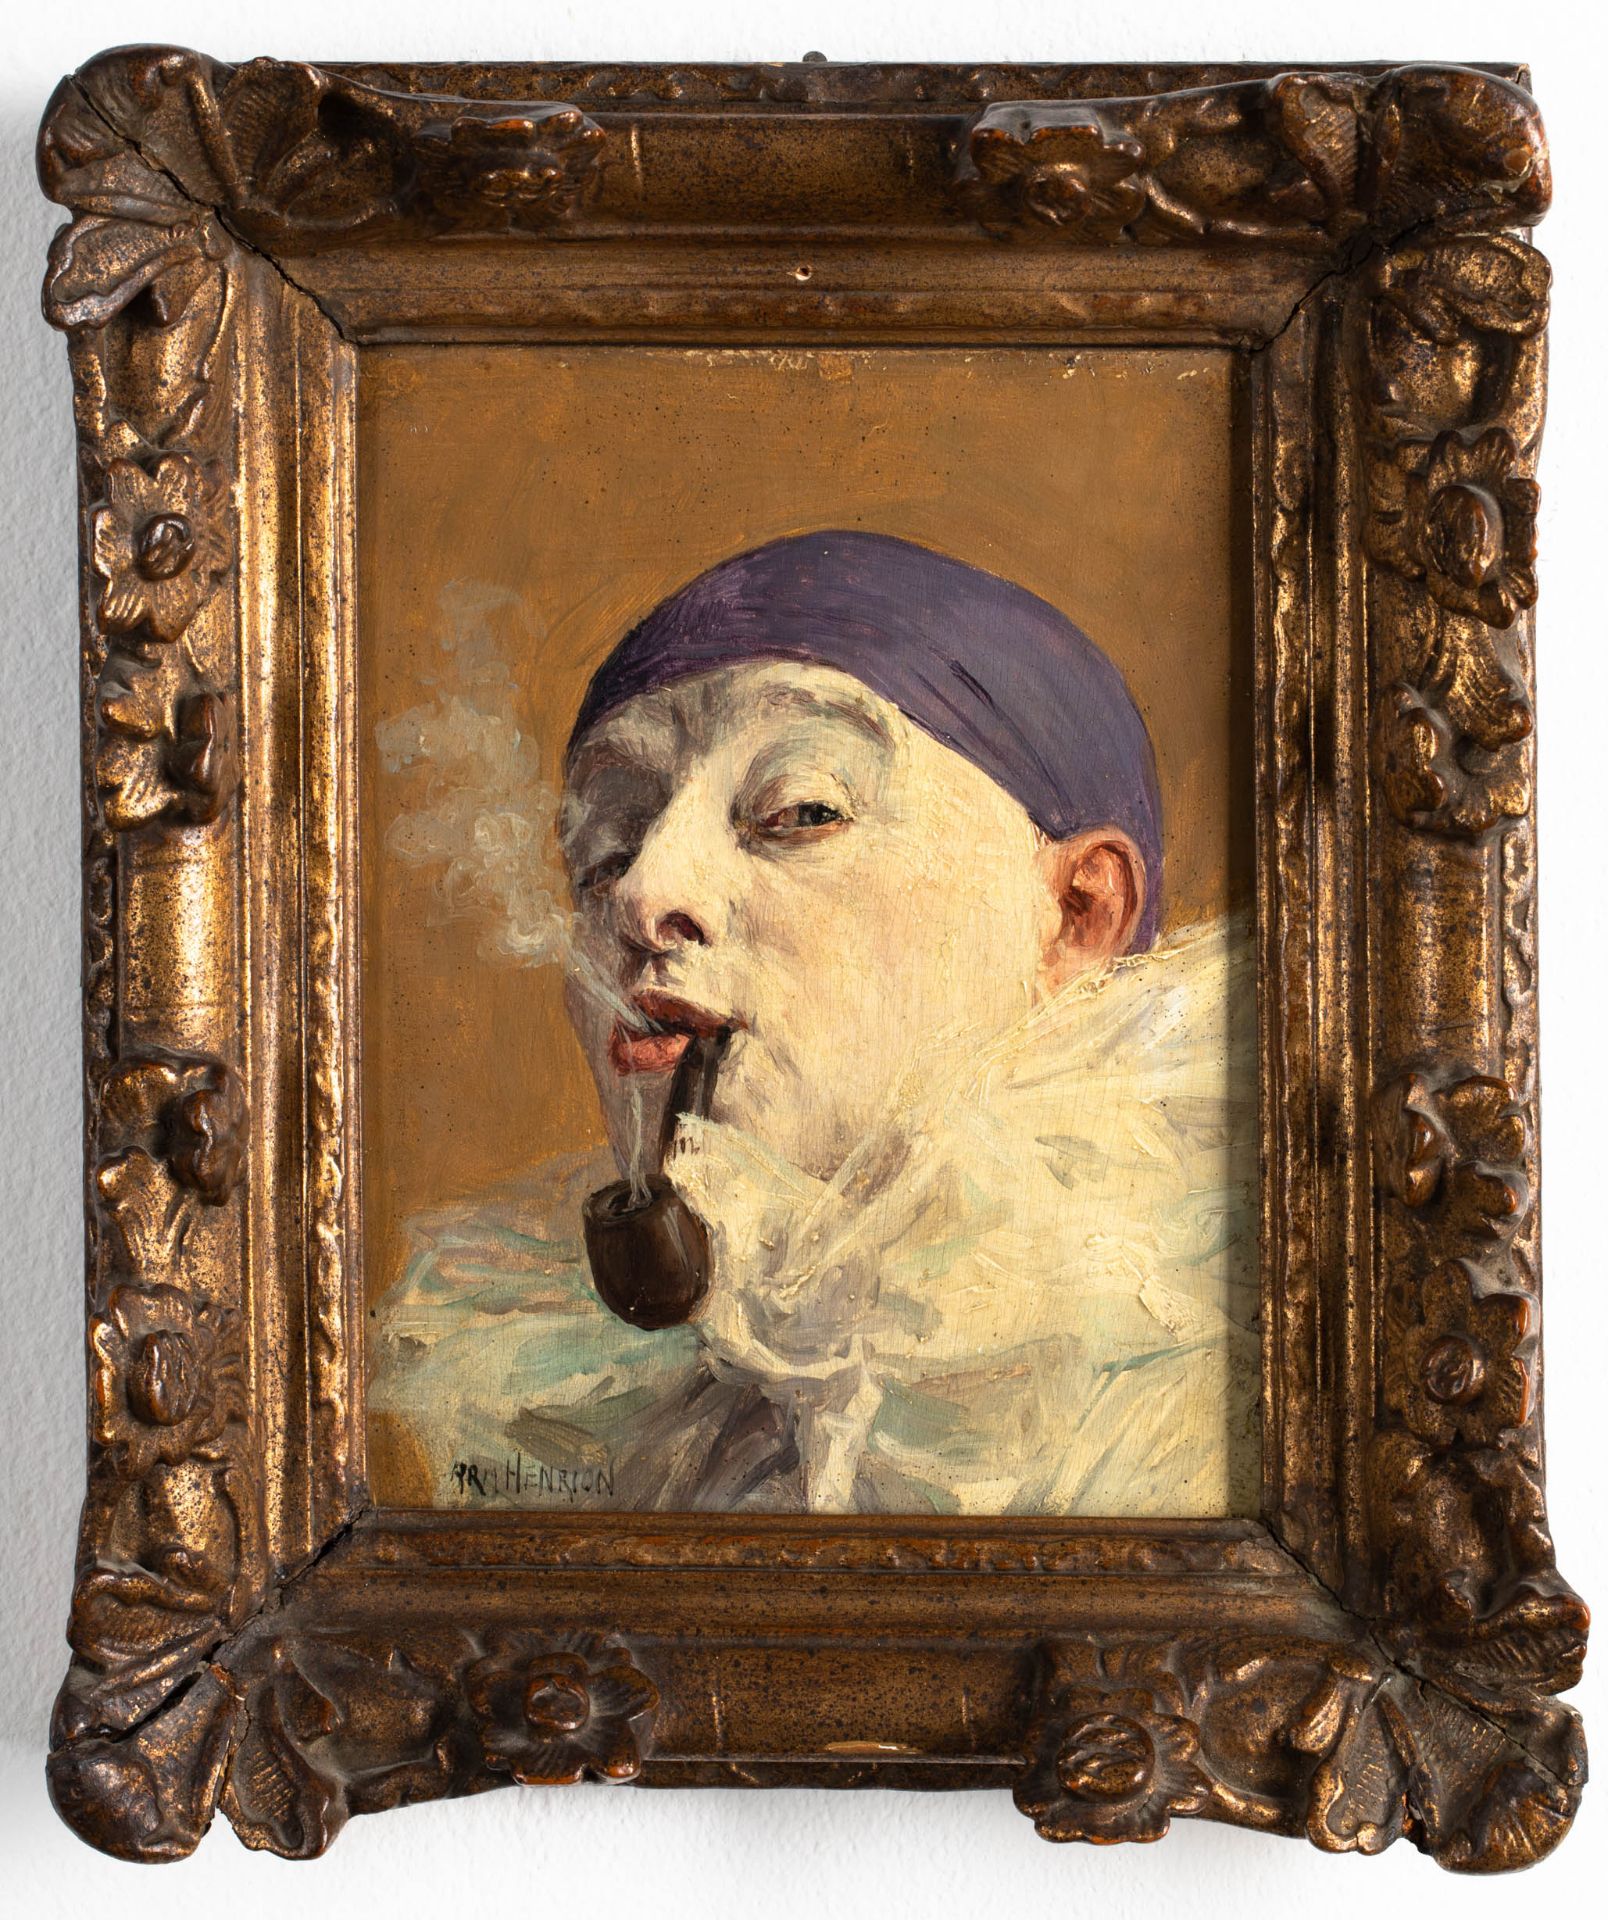 Armand Henrion, Self portrait/ Pierrot with pipe - Image 2 of 5